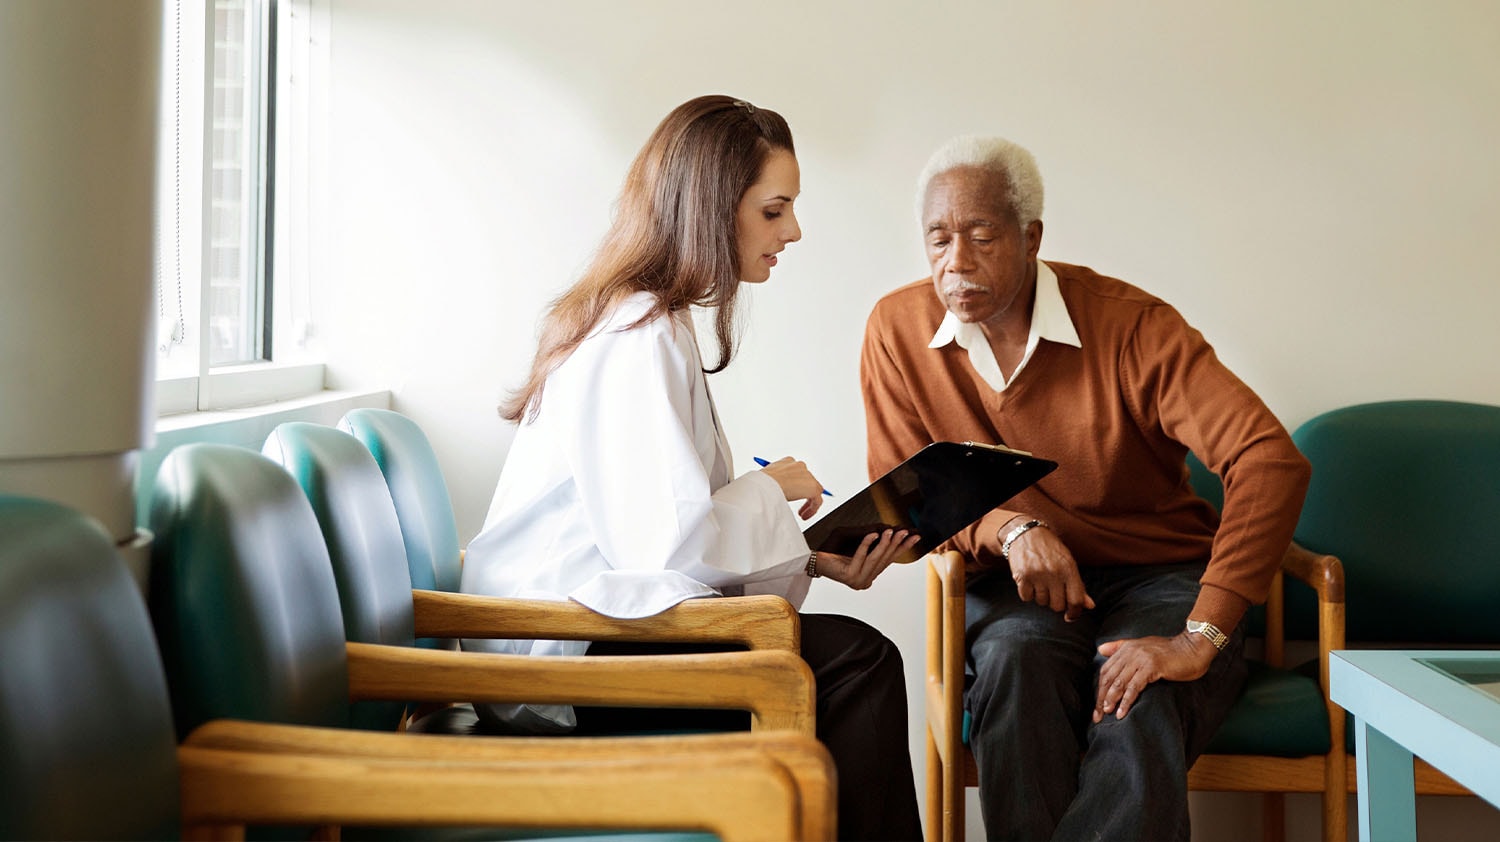 A doctor with a clipboard discussing options with a patient